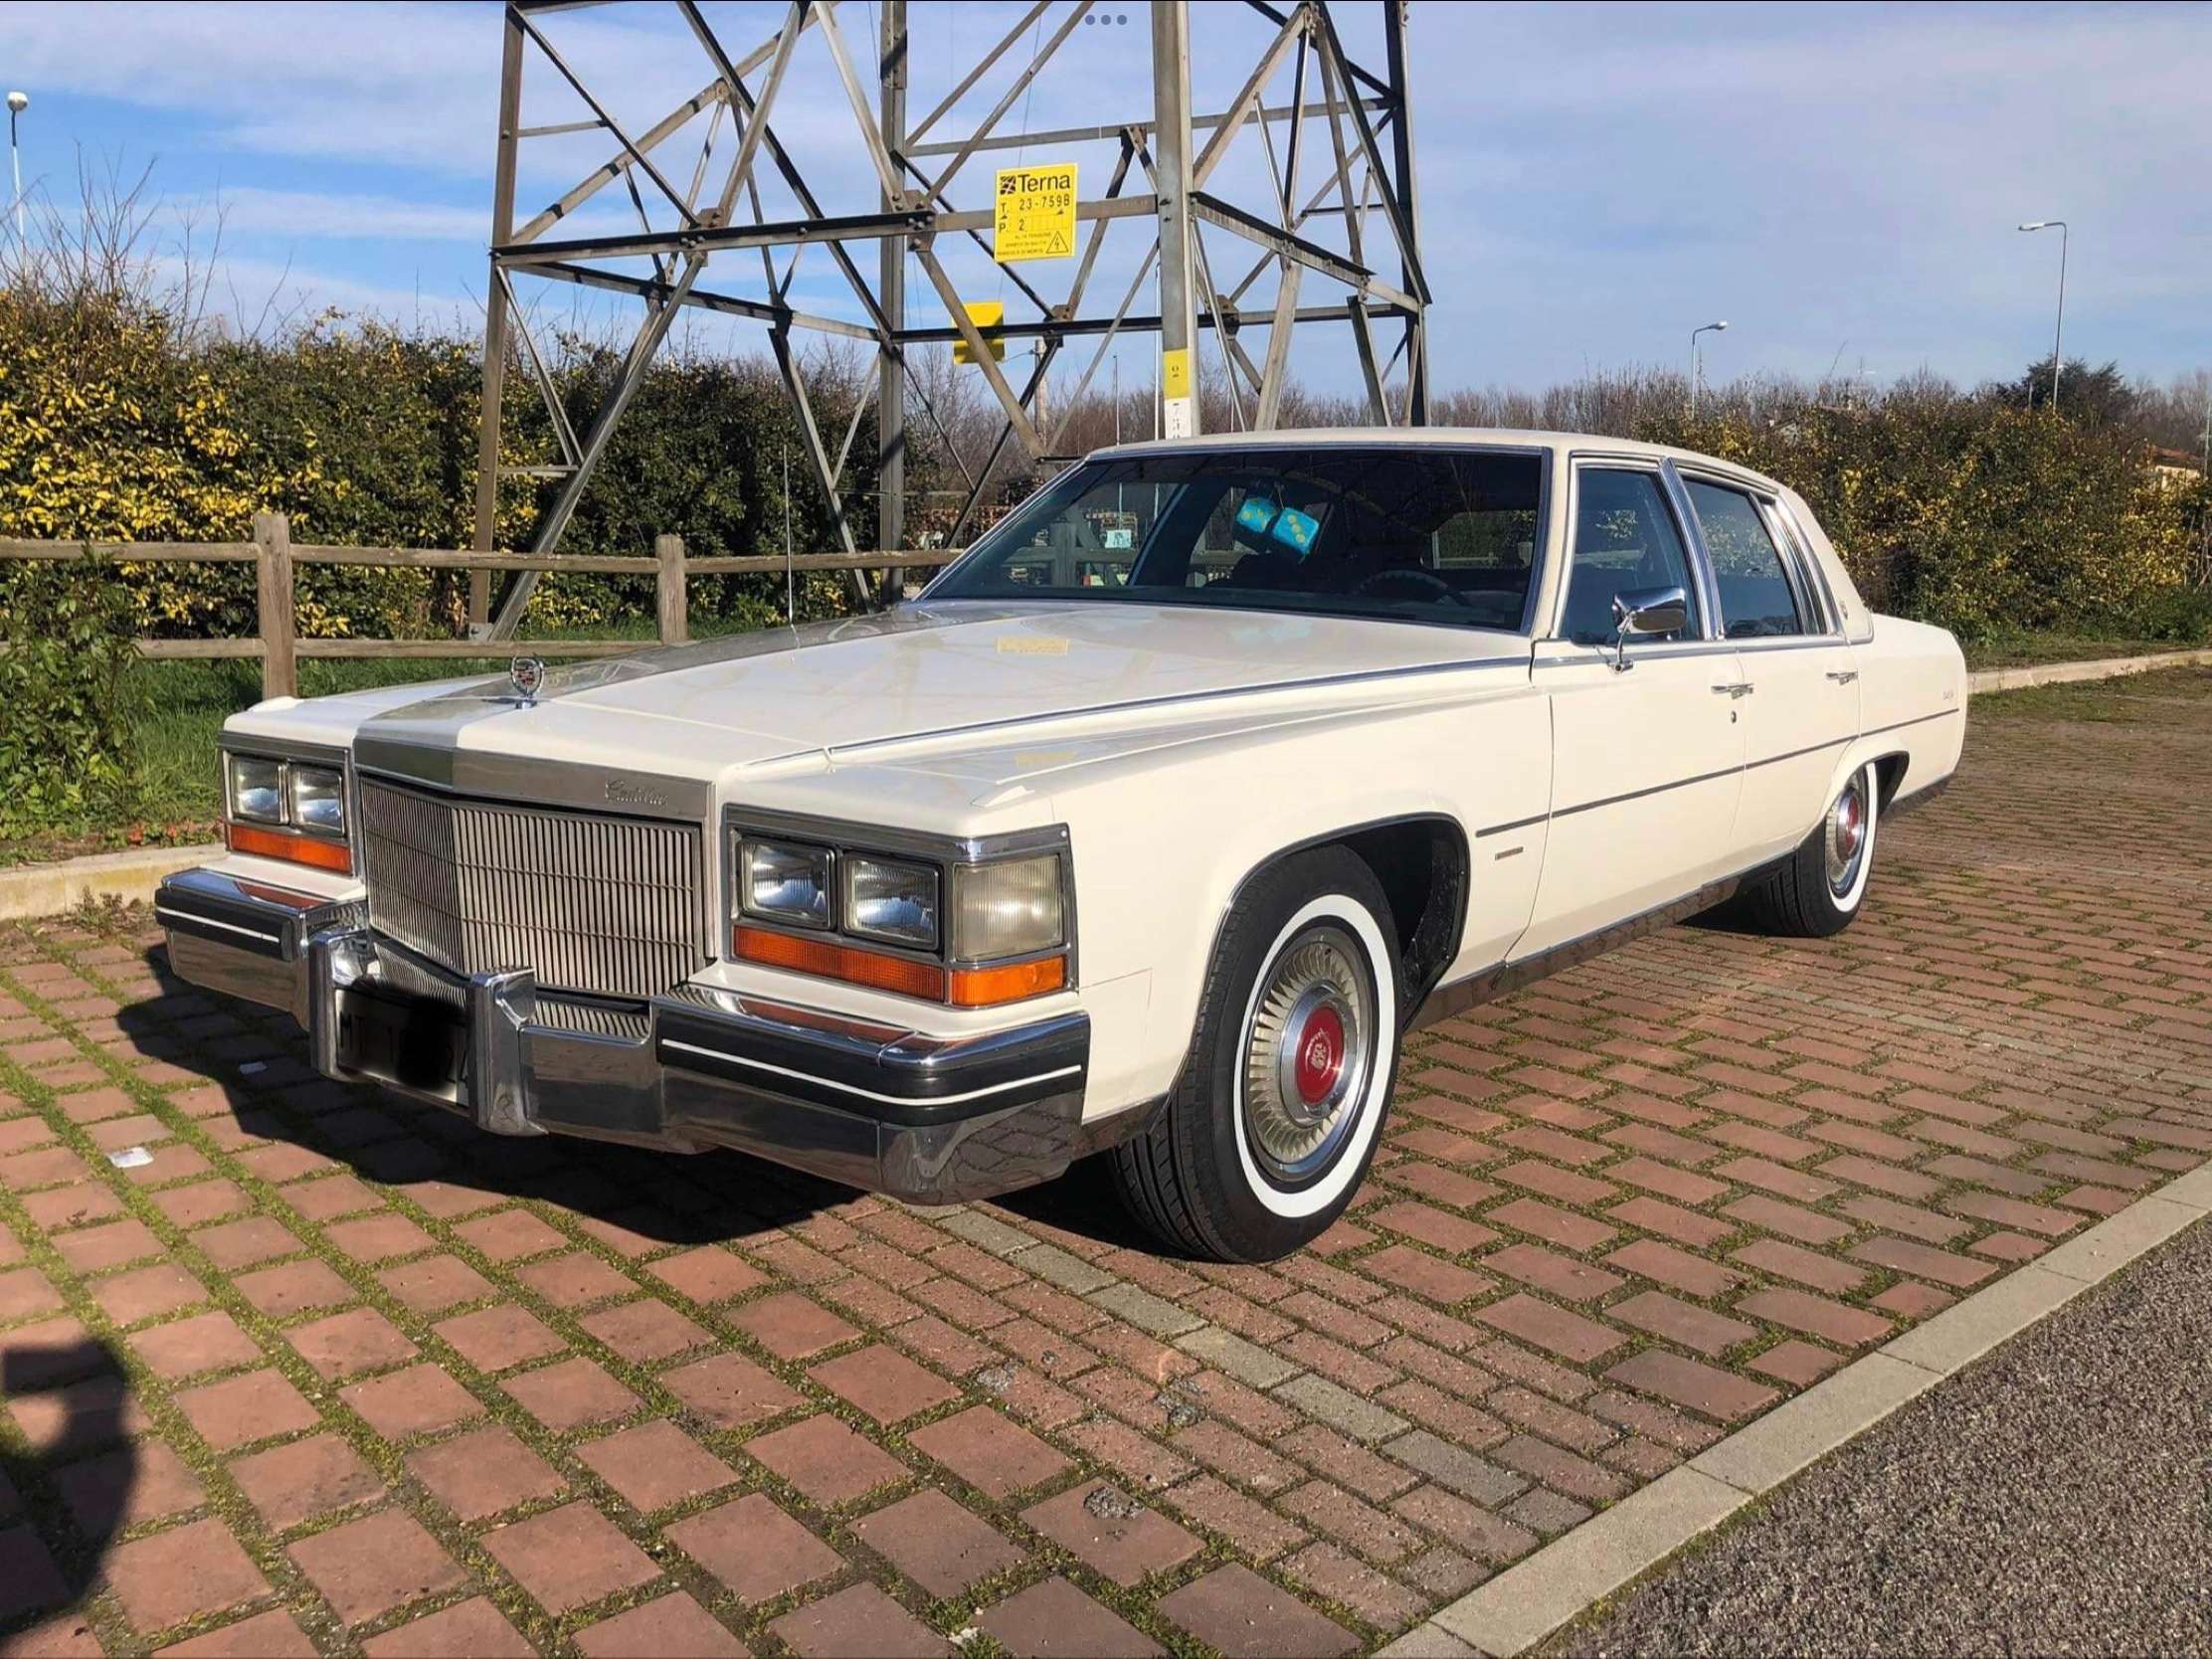 Cadillac Fleetwood Sedan in White antique / classic in Forlì - Forlì Cesena for € 14,500.-